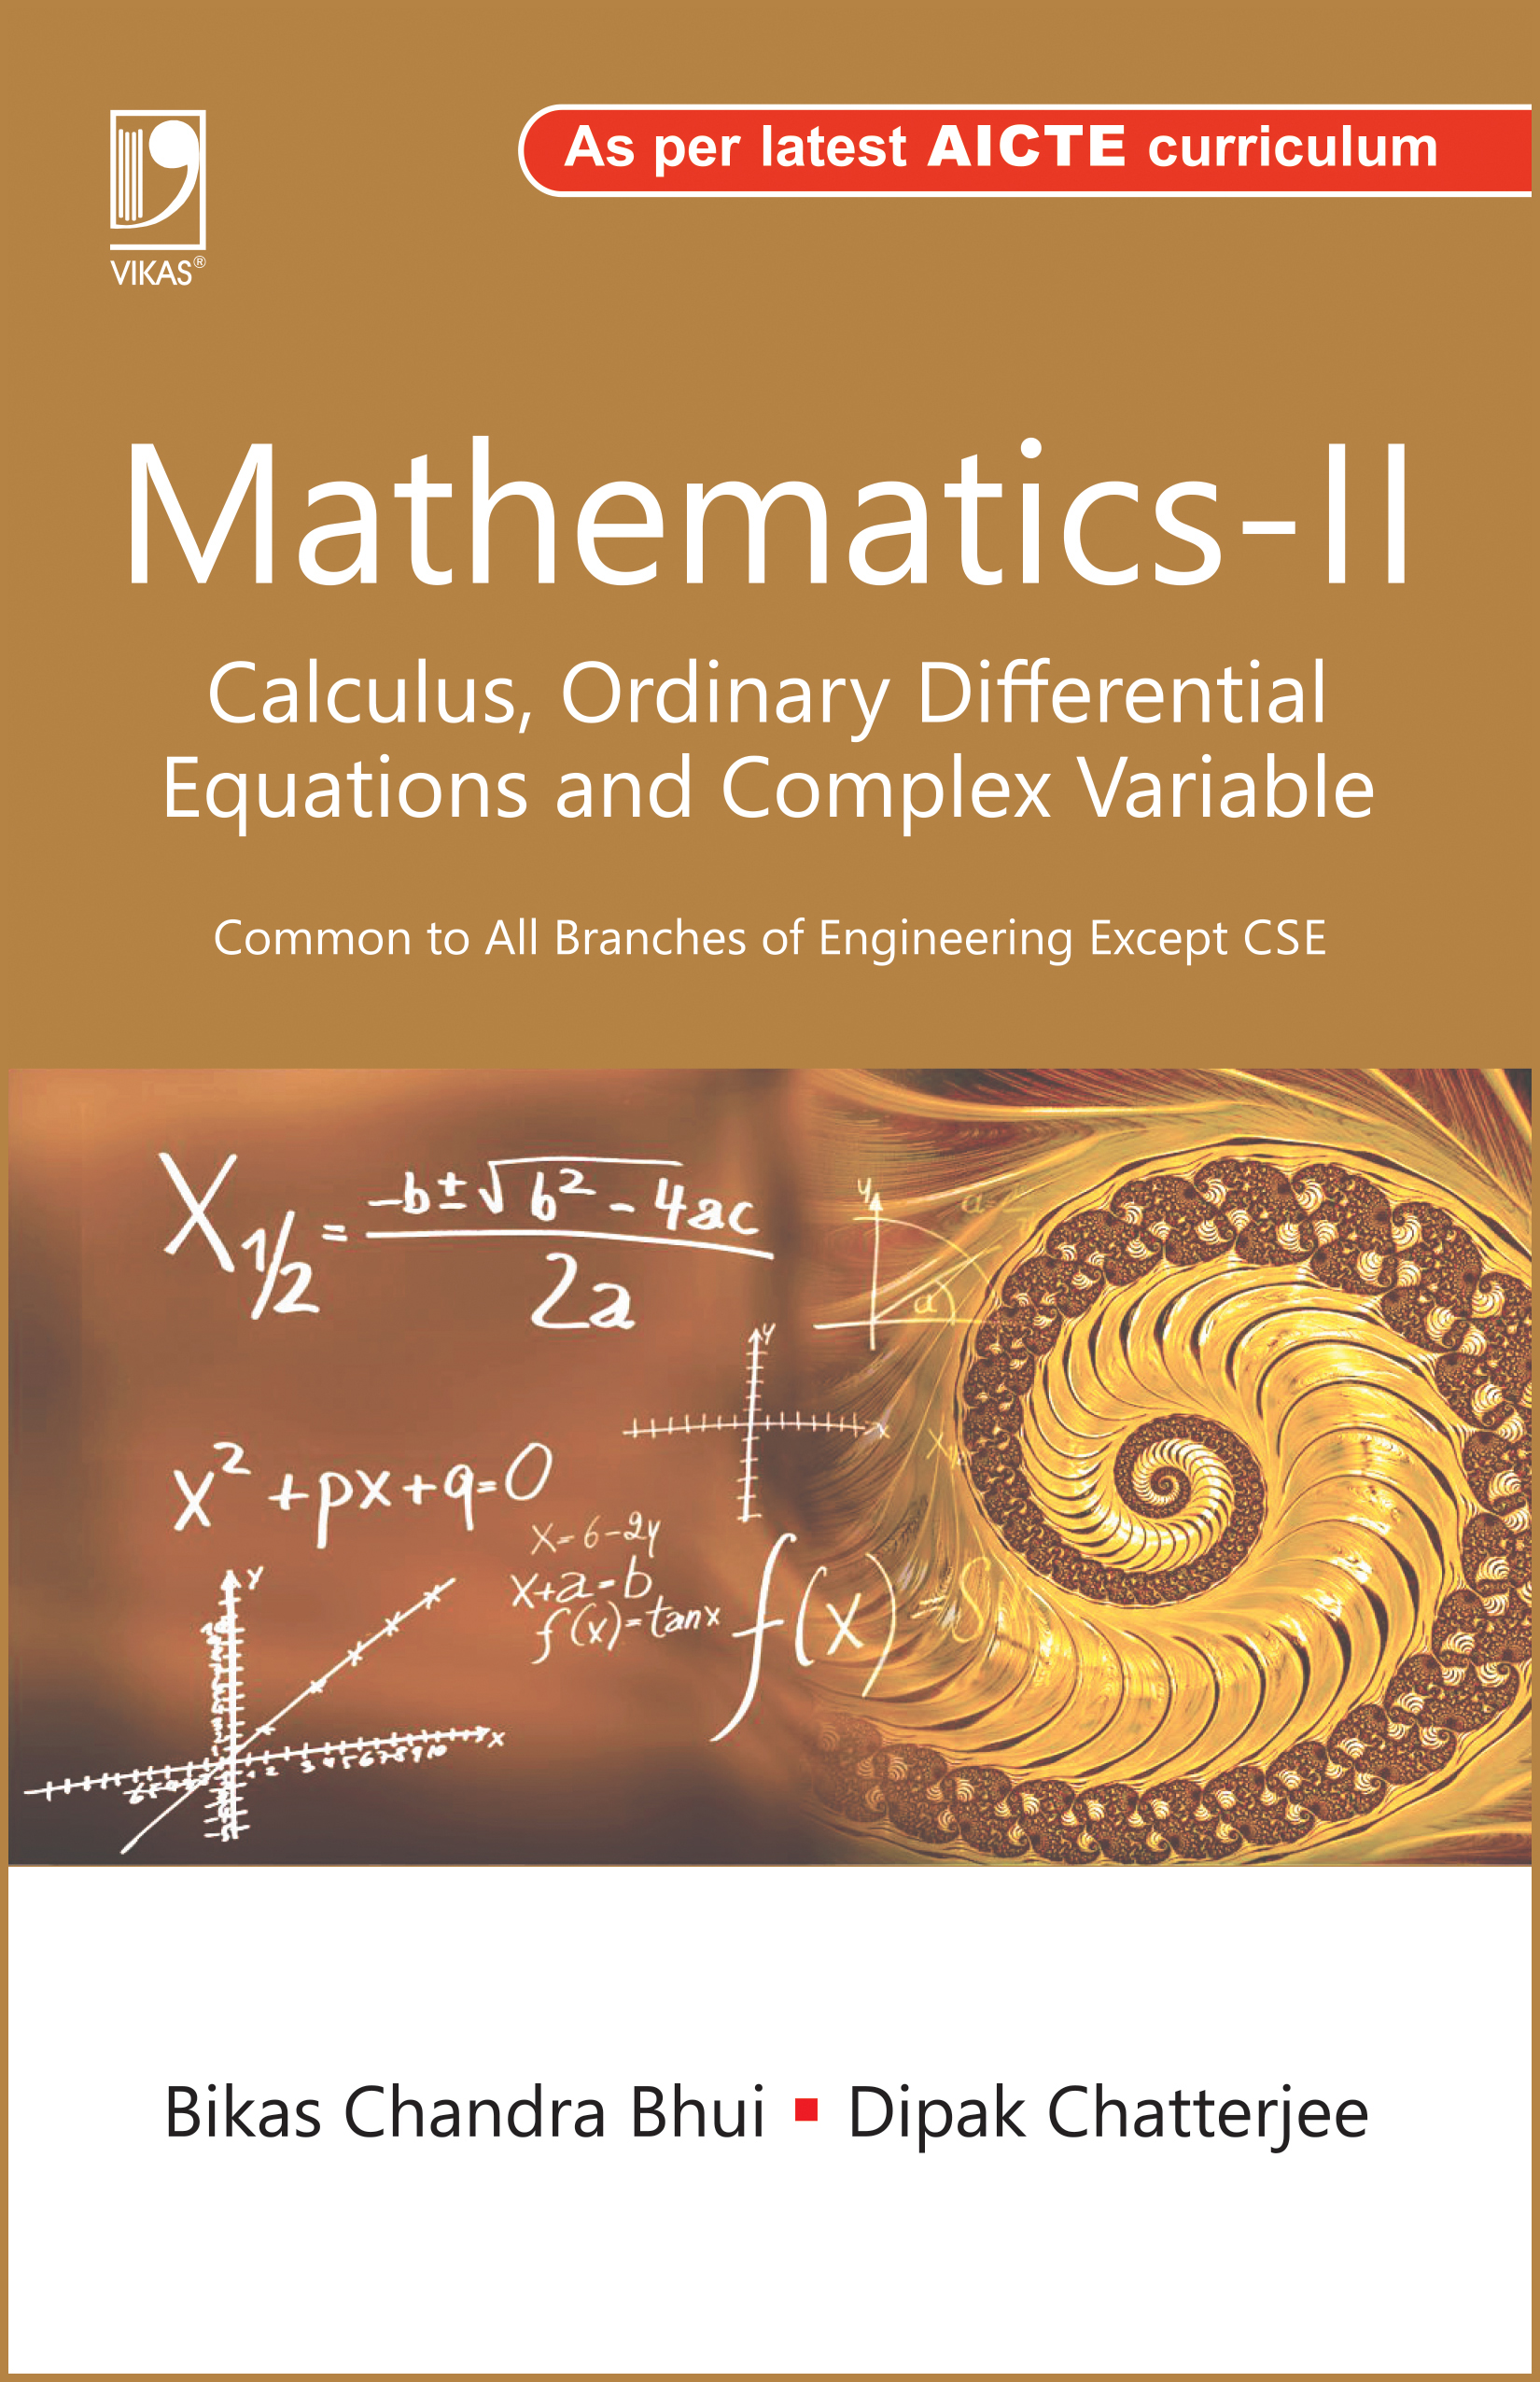 Mathematics-II (Calculus, Ordinary Differential Equations and Complex Variable) (As per AICTE)